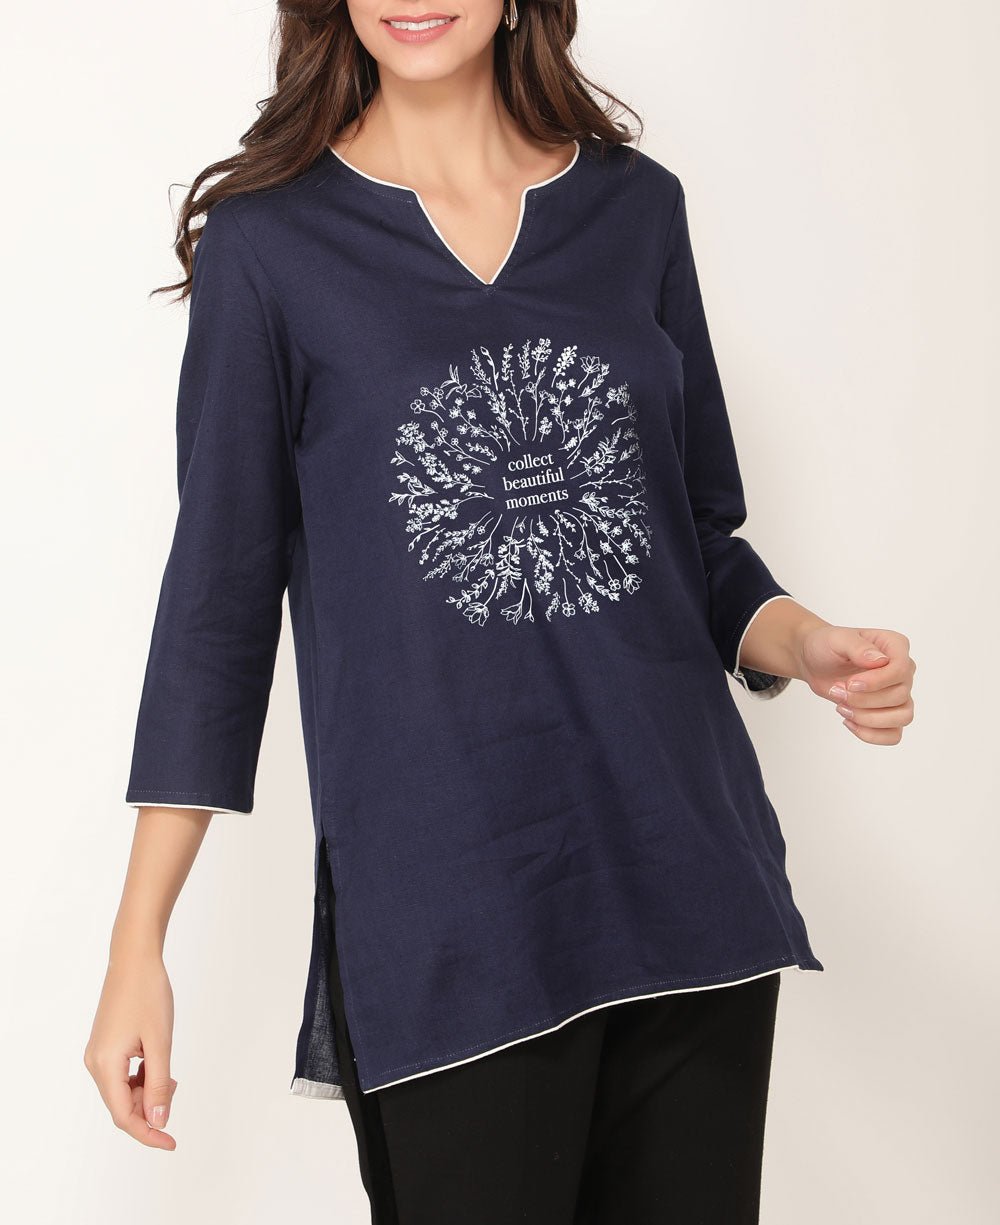 Collect Beautiful Moments Blue Tunic Top - Shirts & Tops S